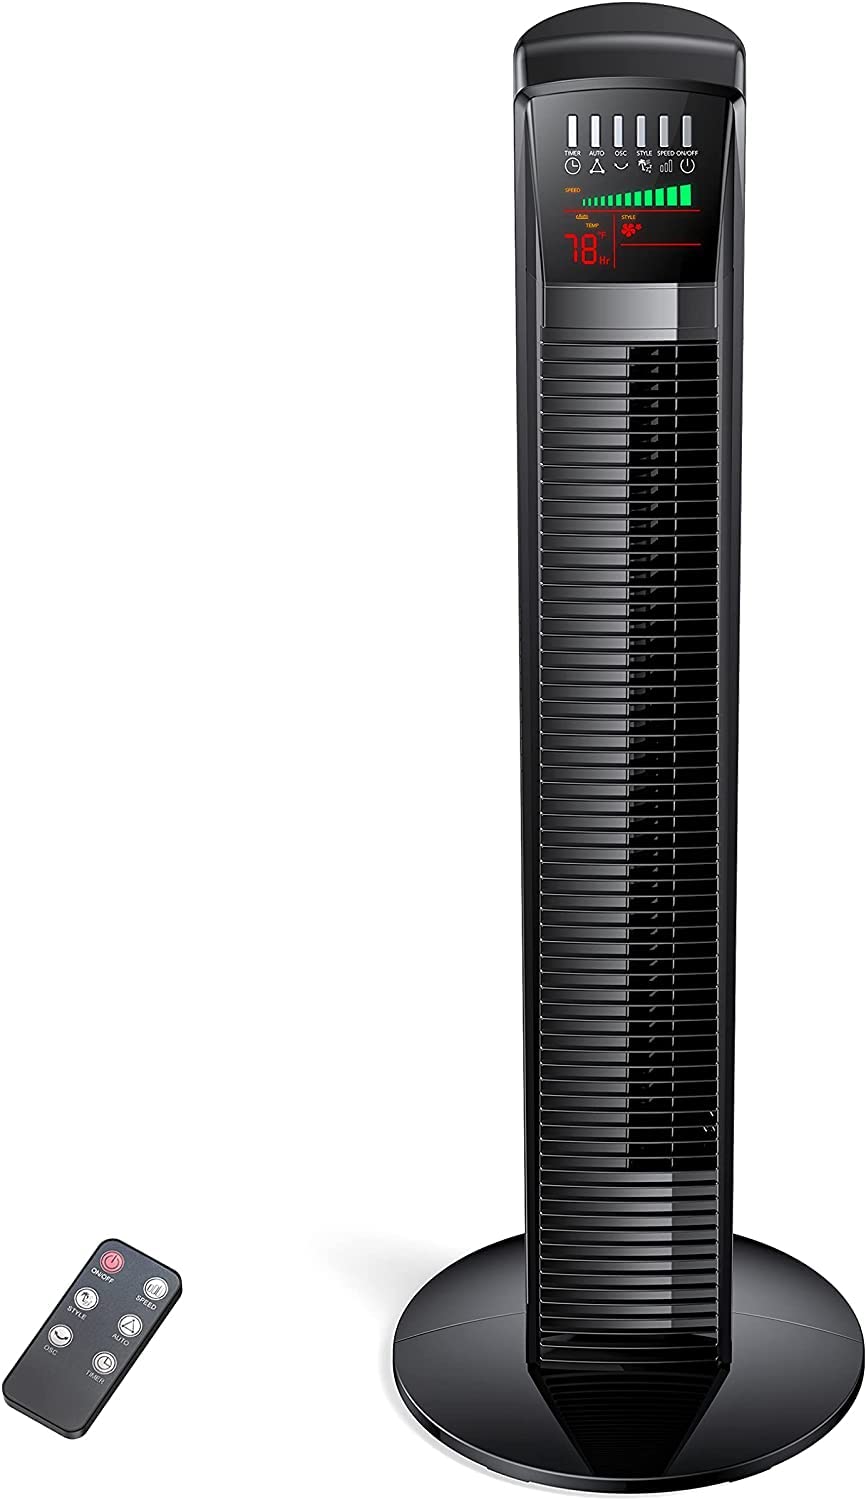 Tower Fan, PARIS RHÔNE Oscillating Quiet Cooling Fan with Remote, Digital Thermostat,12H Timer, 3 Speeds & 4 Modes, Portable Stand Up Floor Bladeless Fan for Bedroom, Living Room, Kitchen, Office